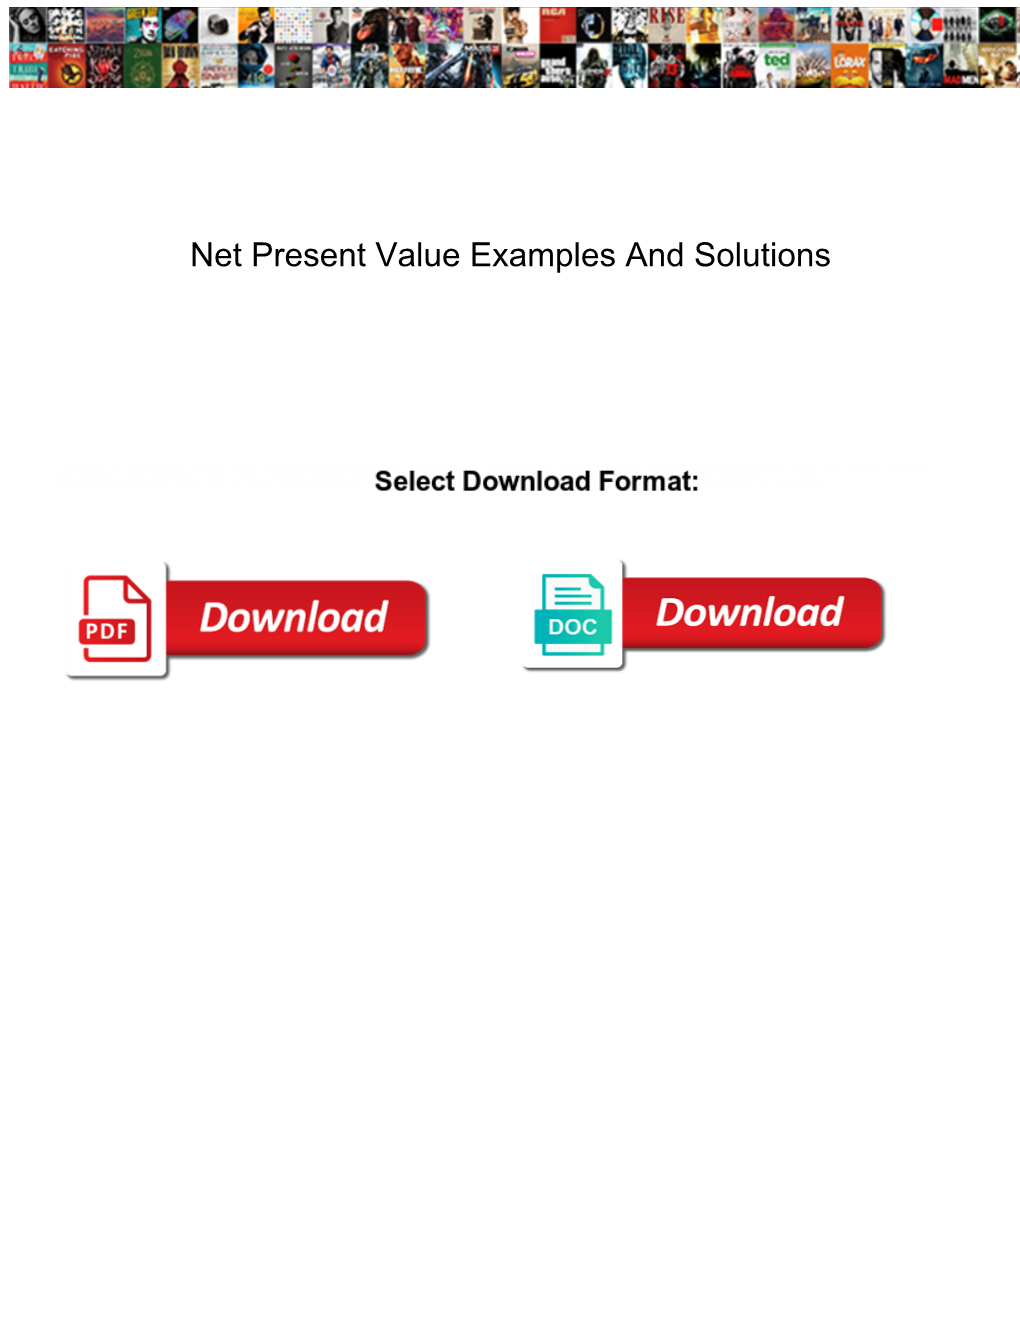 Net Present Value Examples and Solutions